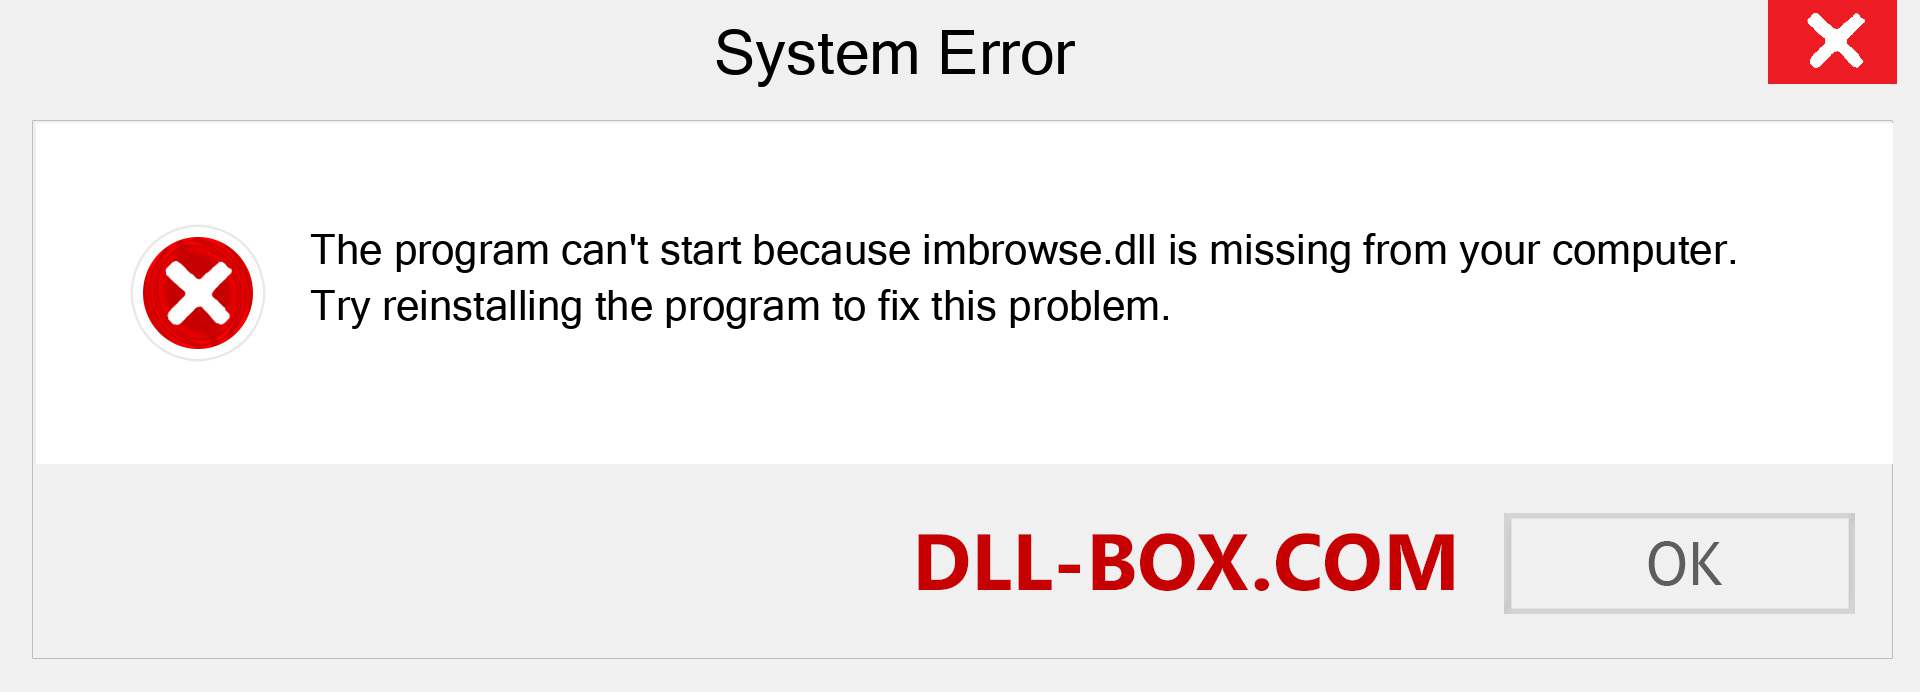  imbrowse.dll file is missing?. Download for Windows 7, 8, 10 - Fix  imbrowse dll Missing Error on Windows, photos, images